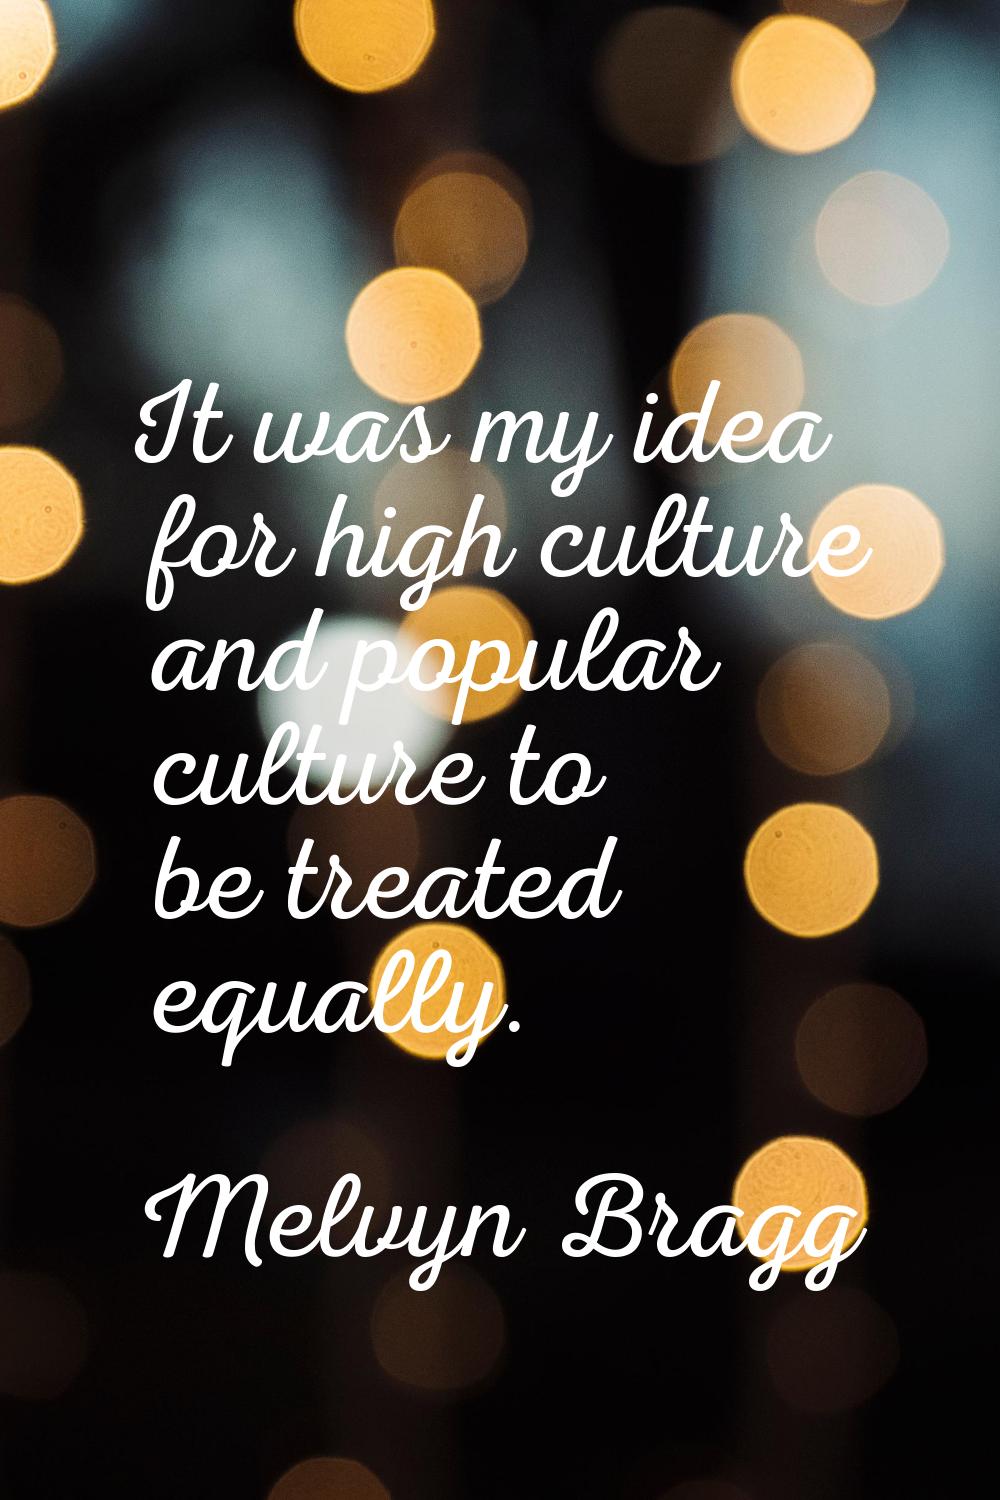 It was my idea for high culture and popular culture to be treated equally.